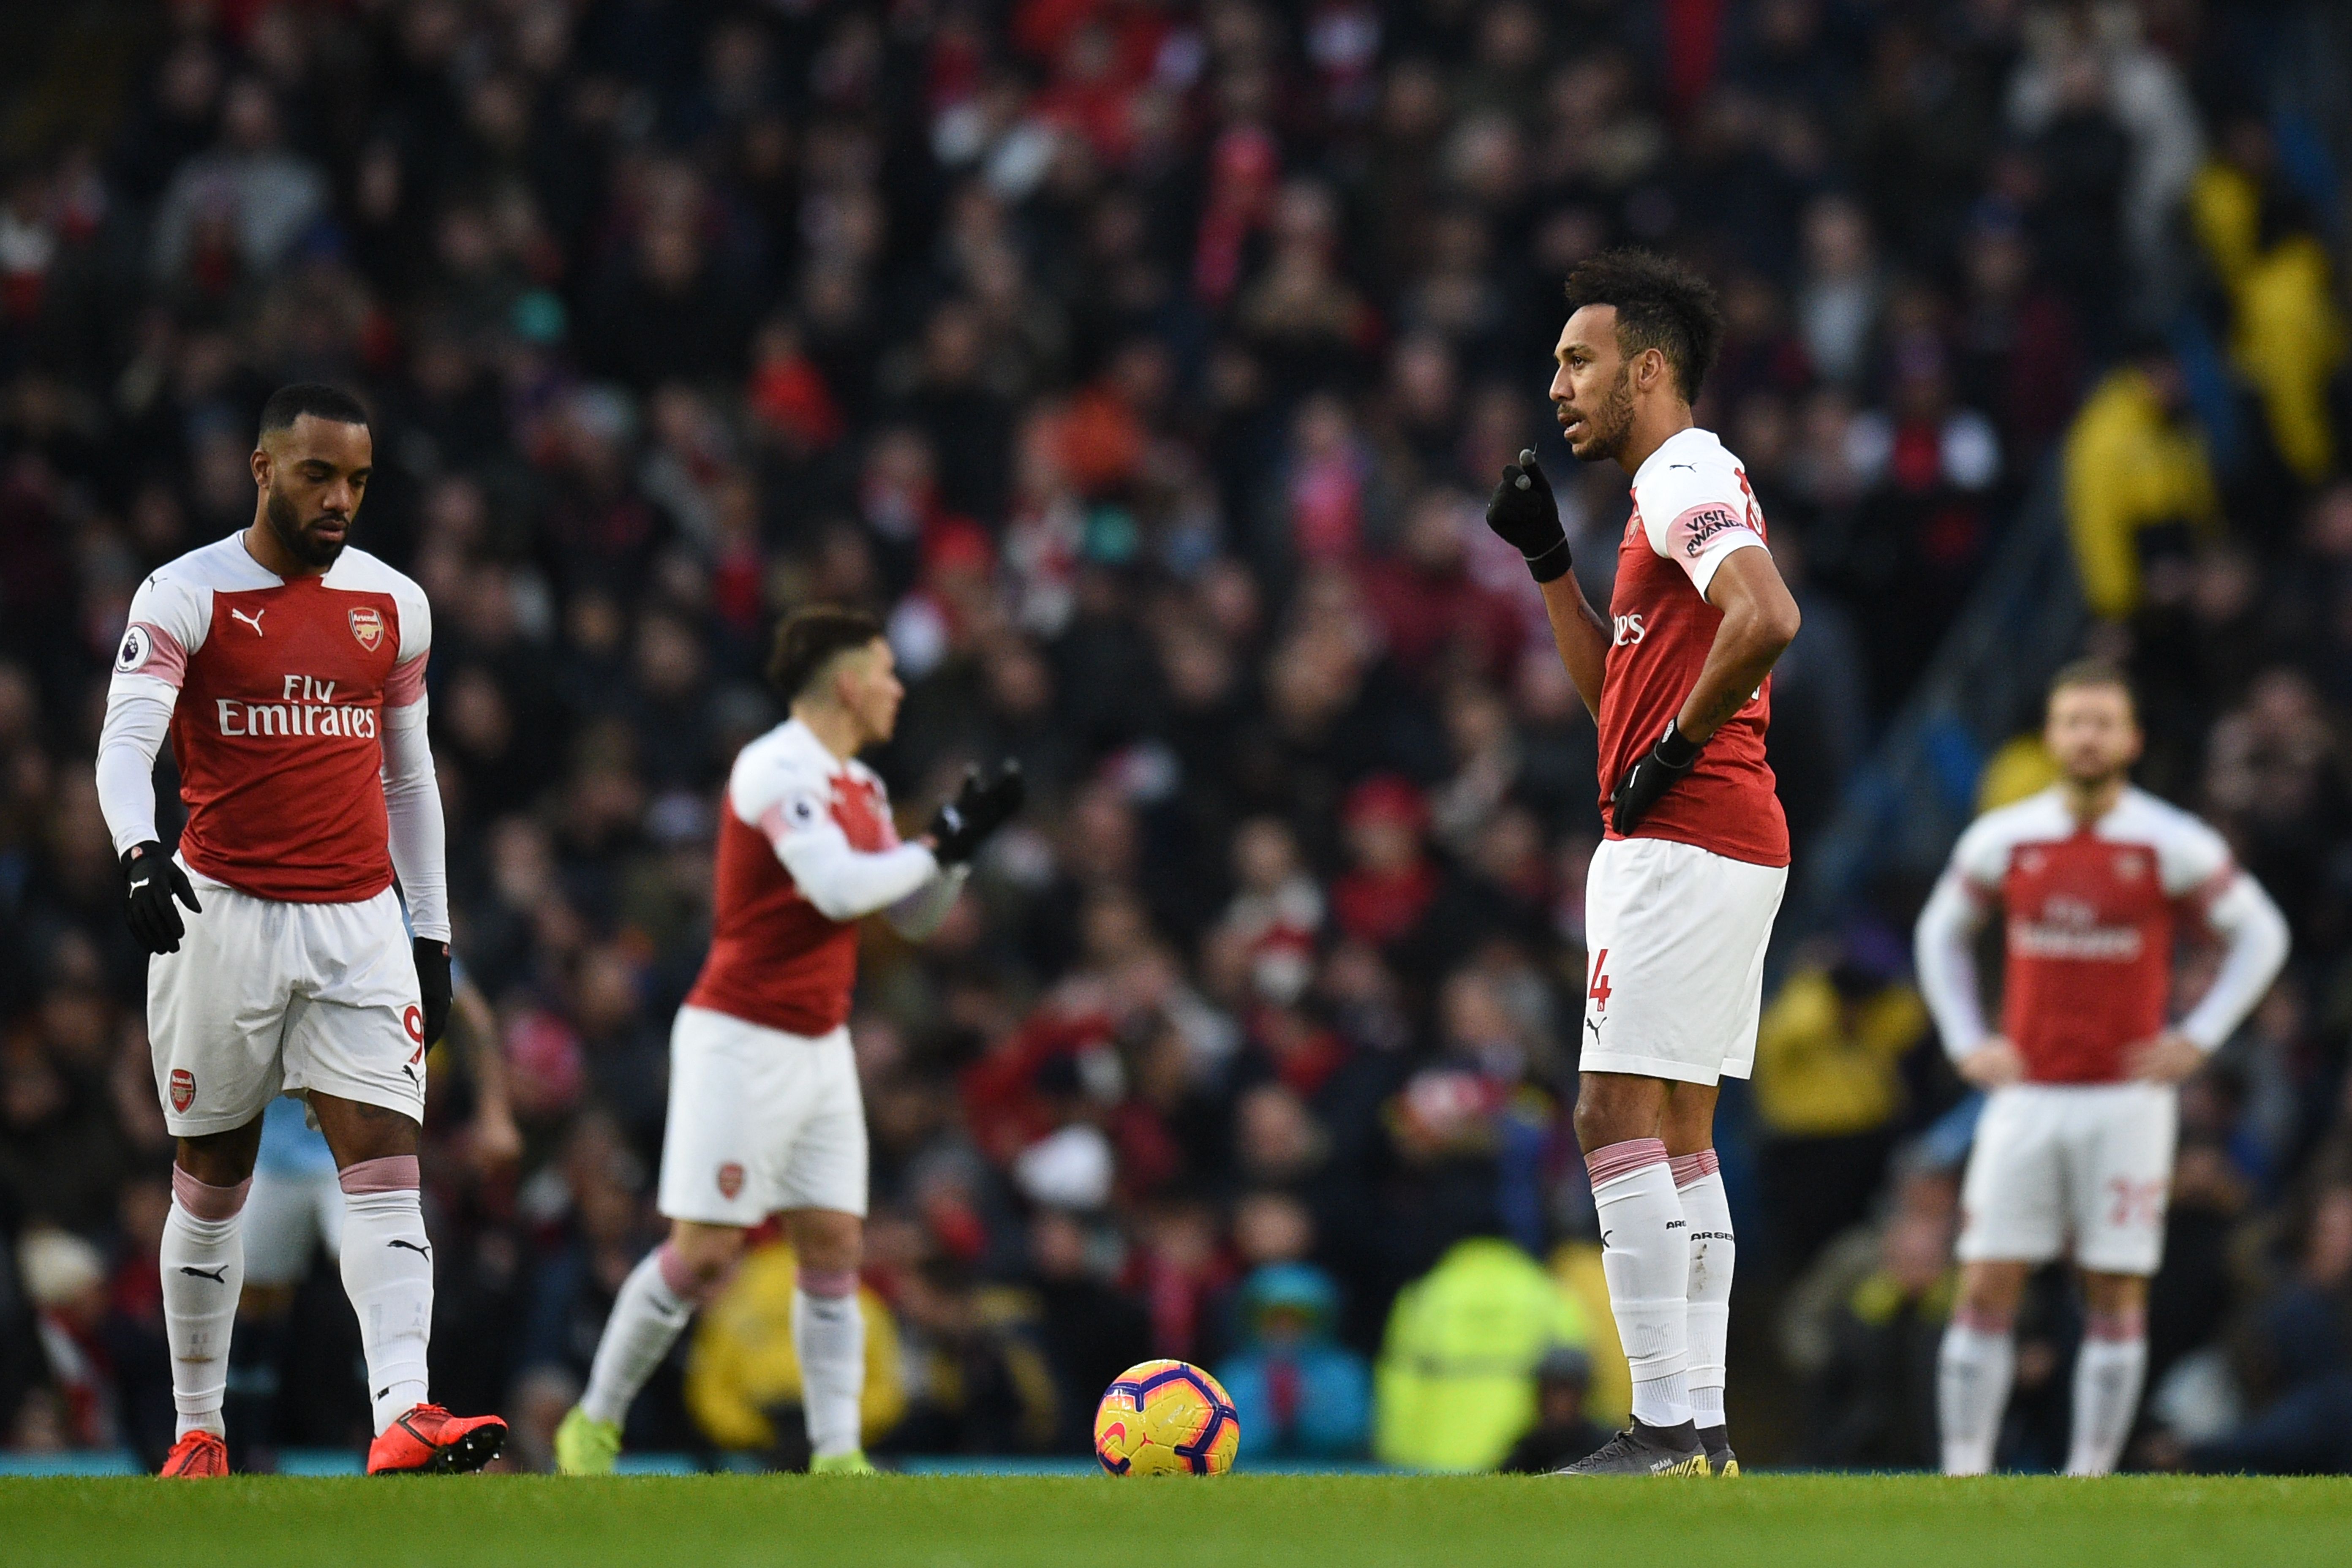 Arsenal's Gabonese striker Pierre-Emerick Aubameyang (2nd R) prepares to take the kick off after they concede an early goal during the English Premier League football match between Manchester City and Arsenal at the Etihad Stadium in Manchester, north west England, on February 3, 2019. (Photo by Oli SCARFF / AFP) / RESTRICTED TO EDITORIAL USE. No use with unauthorized audio, video, data, fixture lists, club/league logos or 'live' services. Online in-match use limited to 120 images. An additional 40 images may be used in extra time. No video emulation. Social media in-match use limited to 120 images. An additional 40 images may be used in extra time. No use in betting publications, games or single club/league/player publications. /         (Photo credit should read OLI SCARFF/AFP/Getty Images)